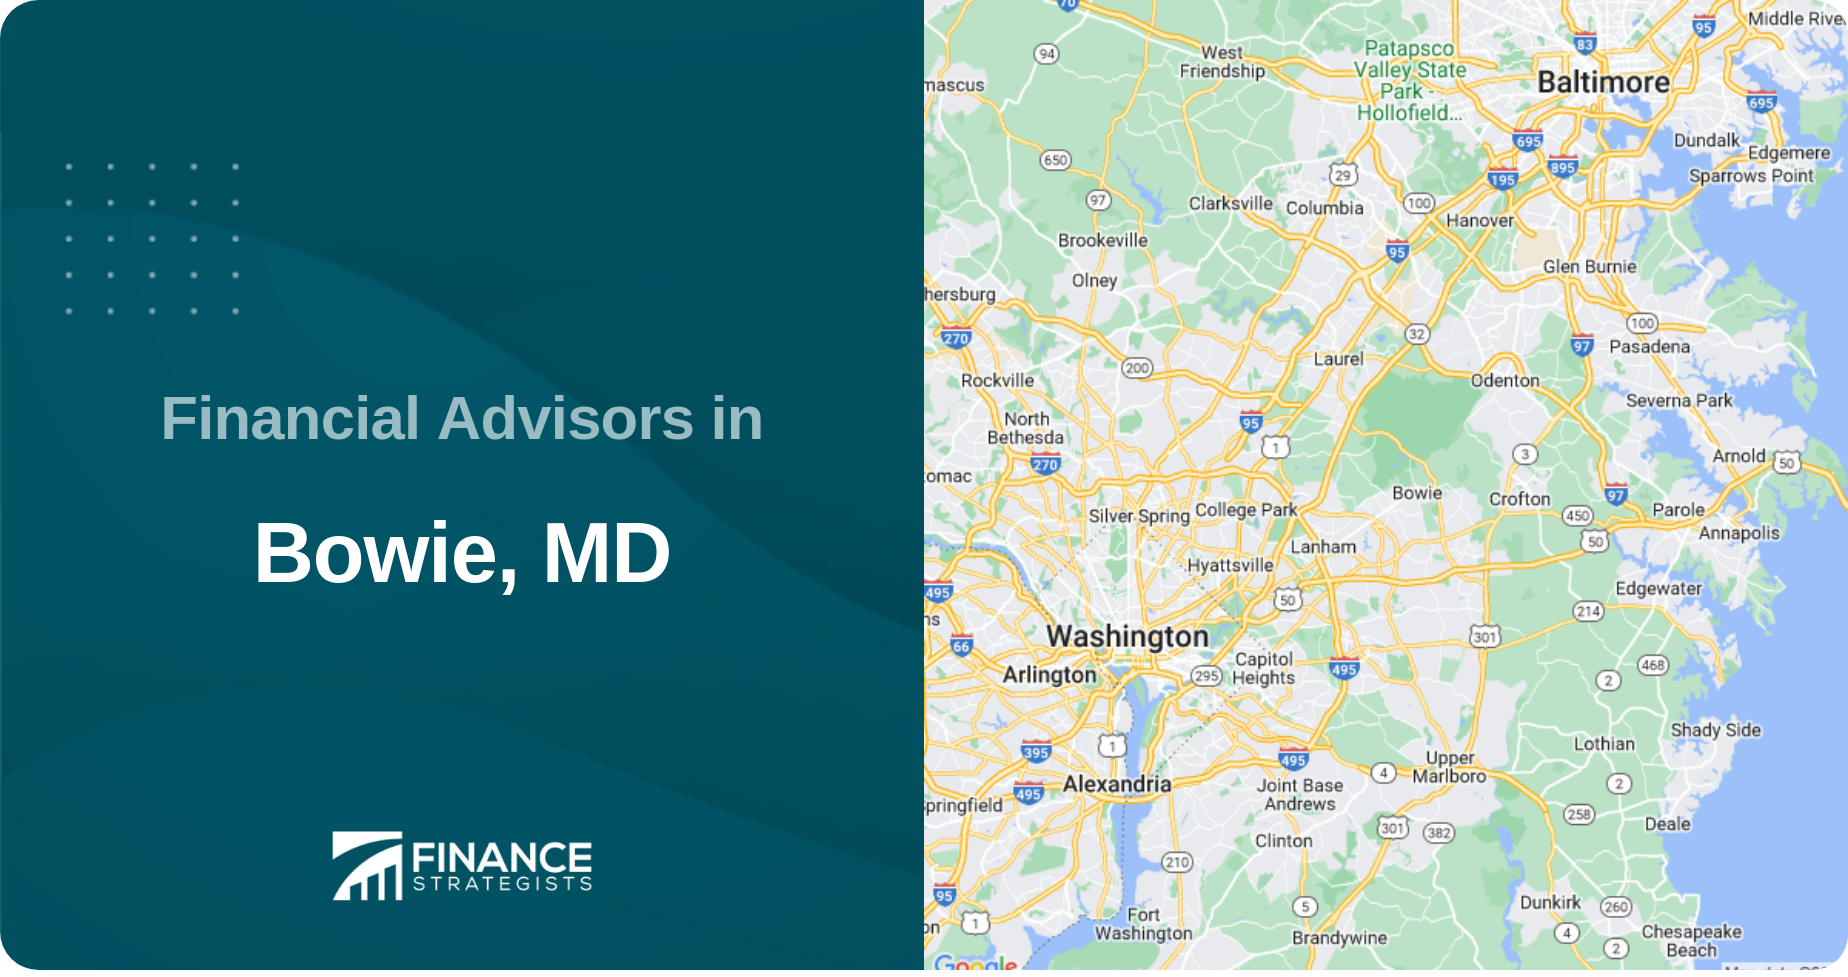 Financial Advisors in Bowie, MD